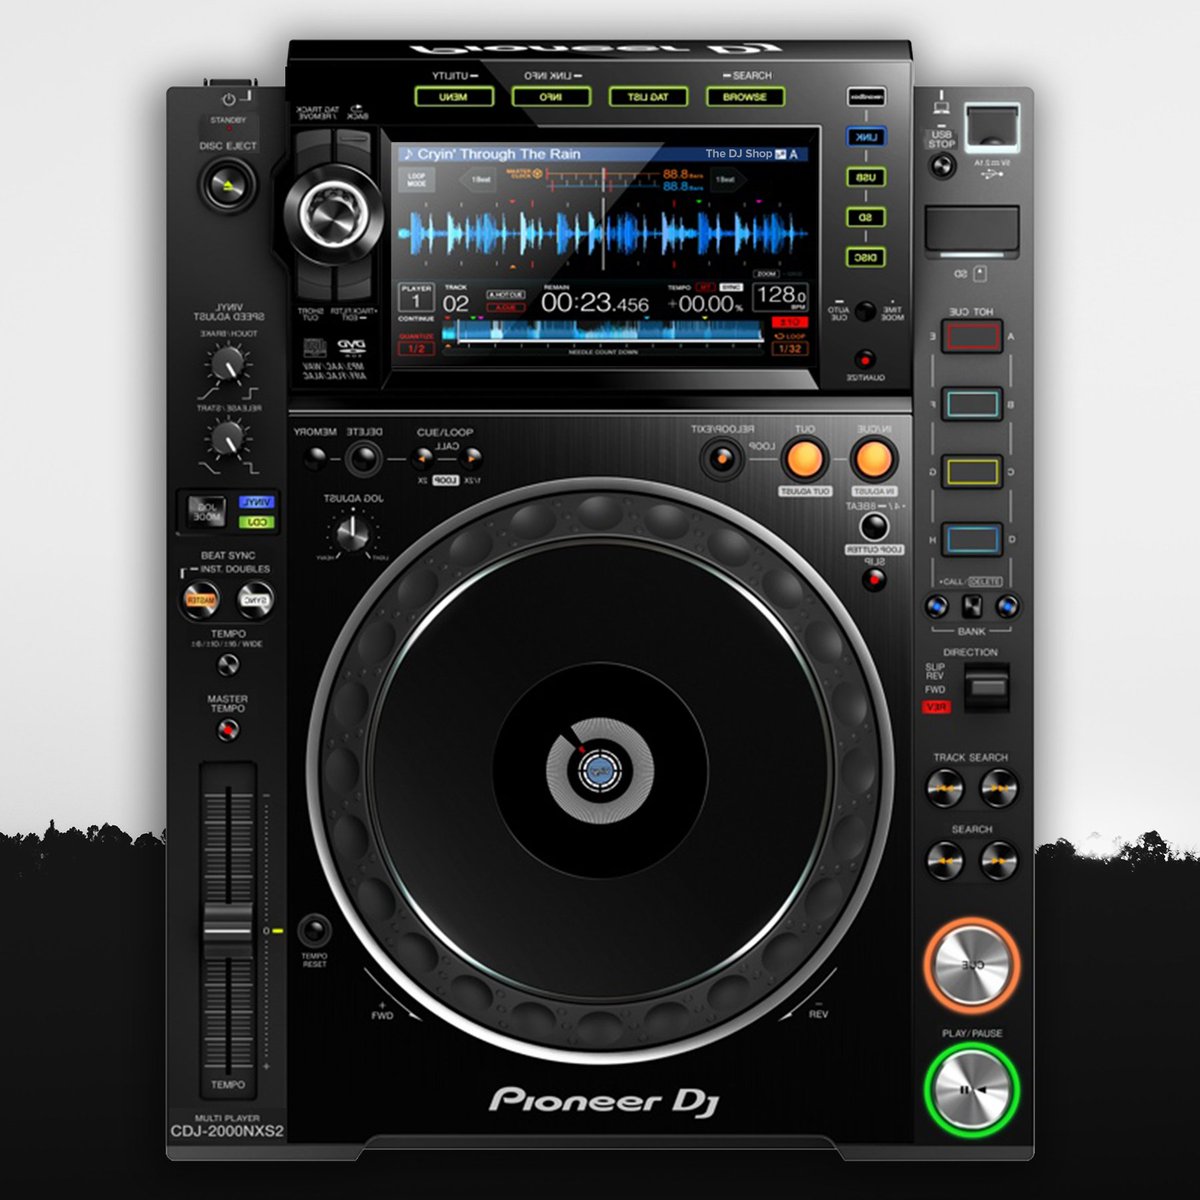 AT LAST A LEFT-HANDED CDJ! . Today Pioneer DJ has announced their first left-handed media player, say hello to the CDJ-2000NXS2-L. It has all the functionalities of the original 2000NXS2 with the added benefit of the professional controls swapped over to make life easier.